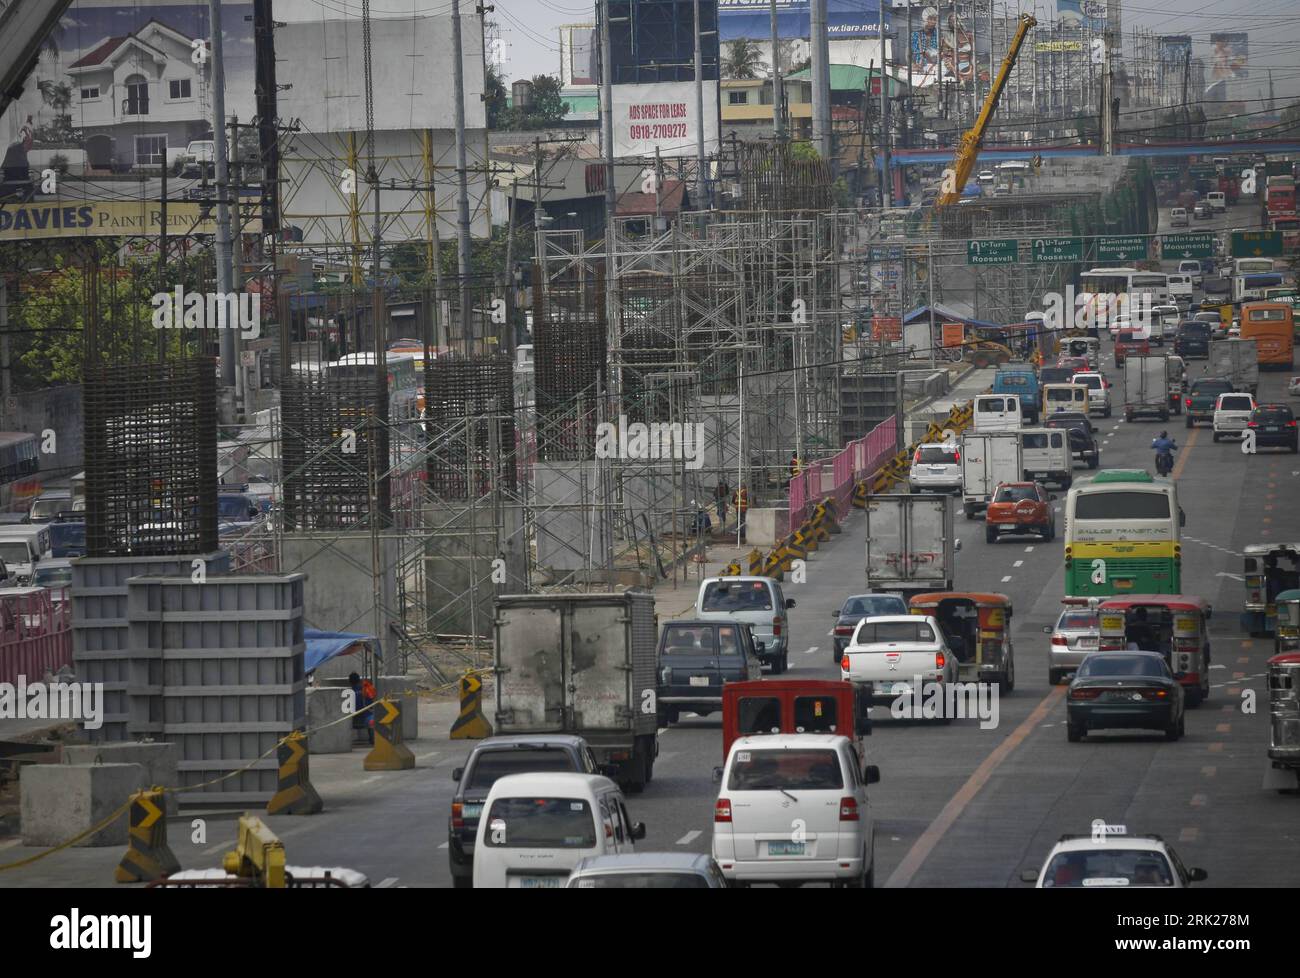 Bildnummer: 53152954  Datum: 26.02.2009  Copyright: imago/Xinhua  Vehicles pass by a government infrastructure project along a main thoroughfare in Manila, capital of the Philippines, Feb. 26, 2009. kbdig  Straße, Verkehr quer   ie    Bildnummer 53152954 Date 26 02 2009 Copyright Imago XINHUA VEHICLES Passport by a Government Infrastructure Project Along a Main thoroughfare in Manila Capital of The Philippines Feb 26 2009 Kbdig Road Traffic horizontal ie Stock Photo